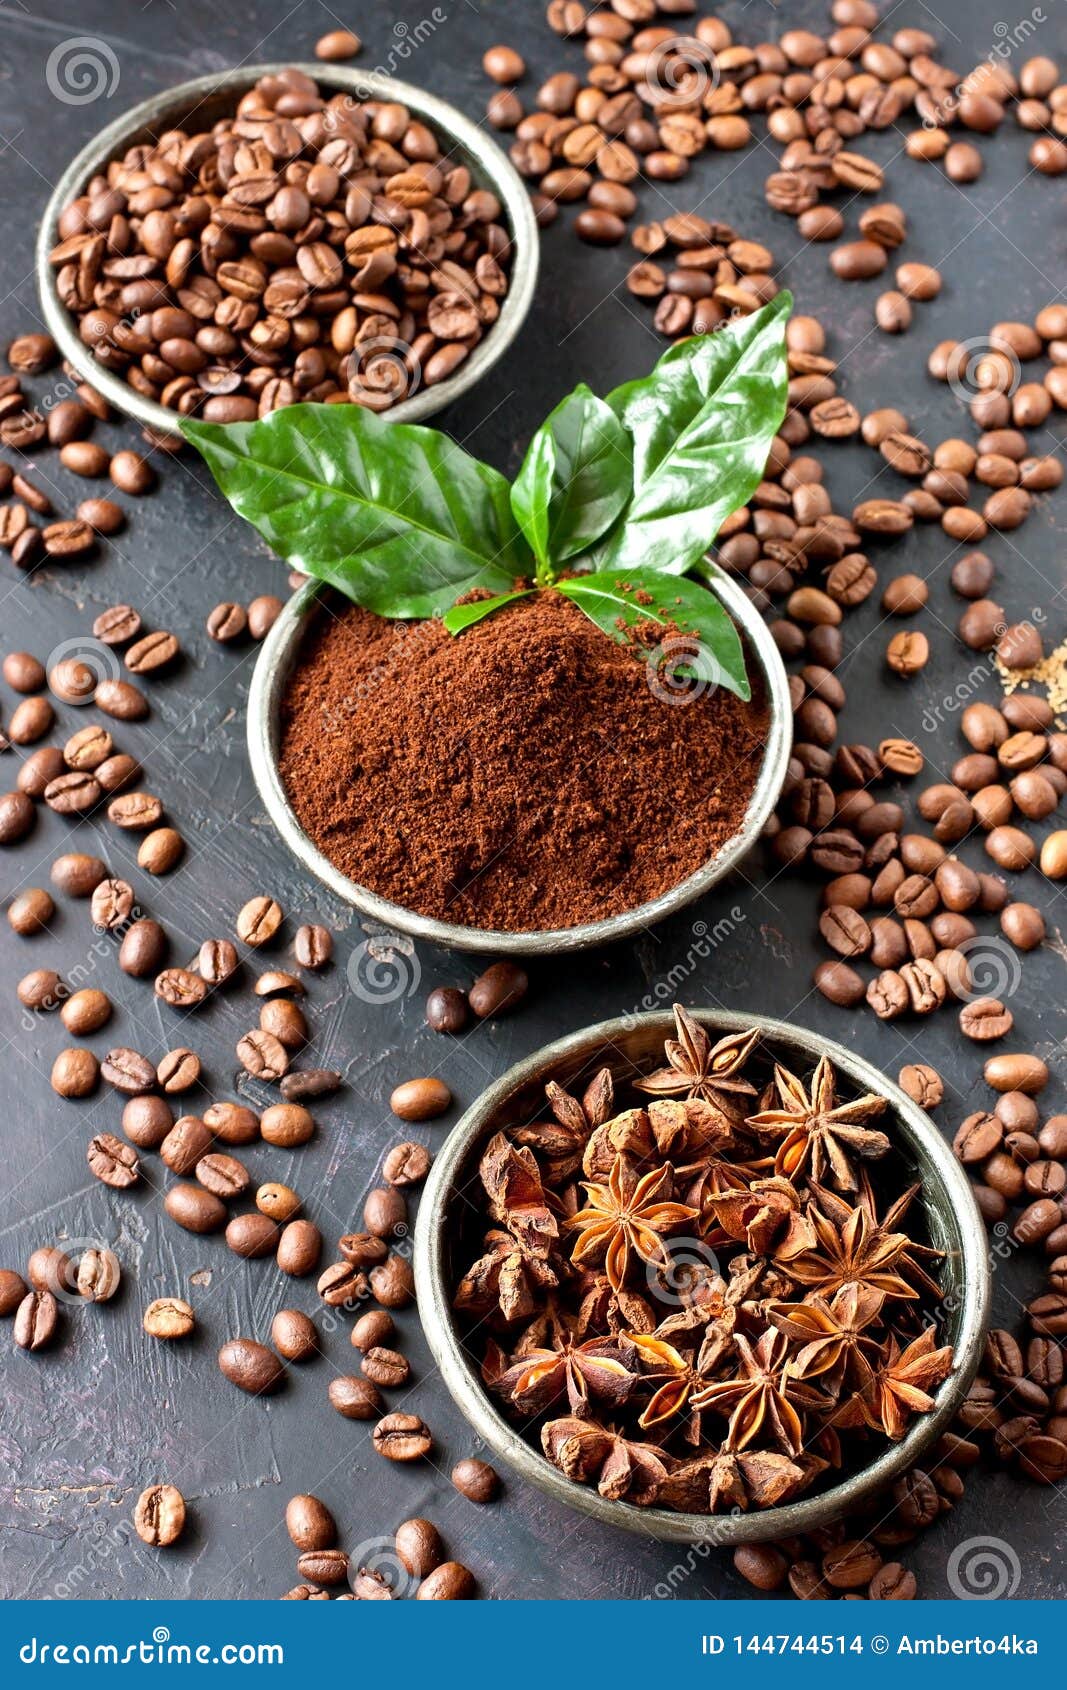 Coffee Beans And Ground Powder On Stone Background. Top